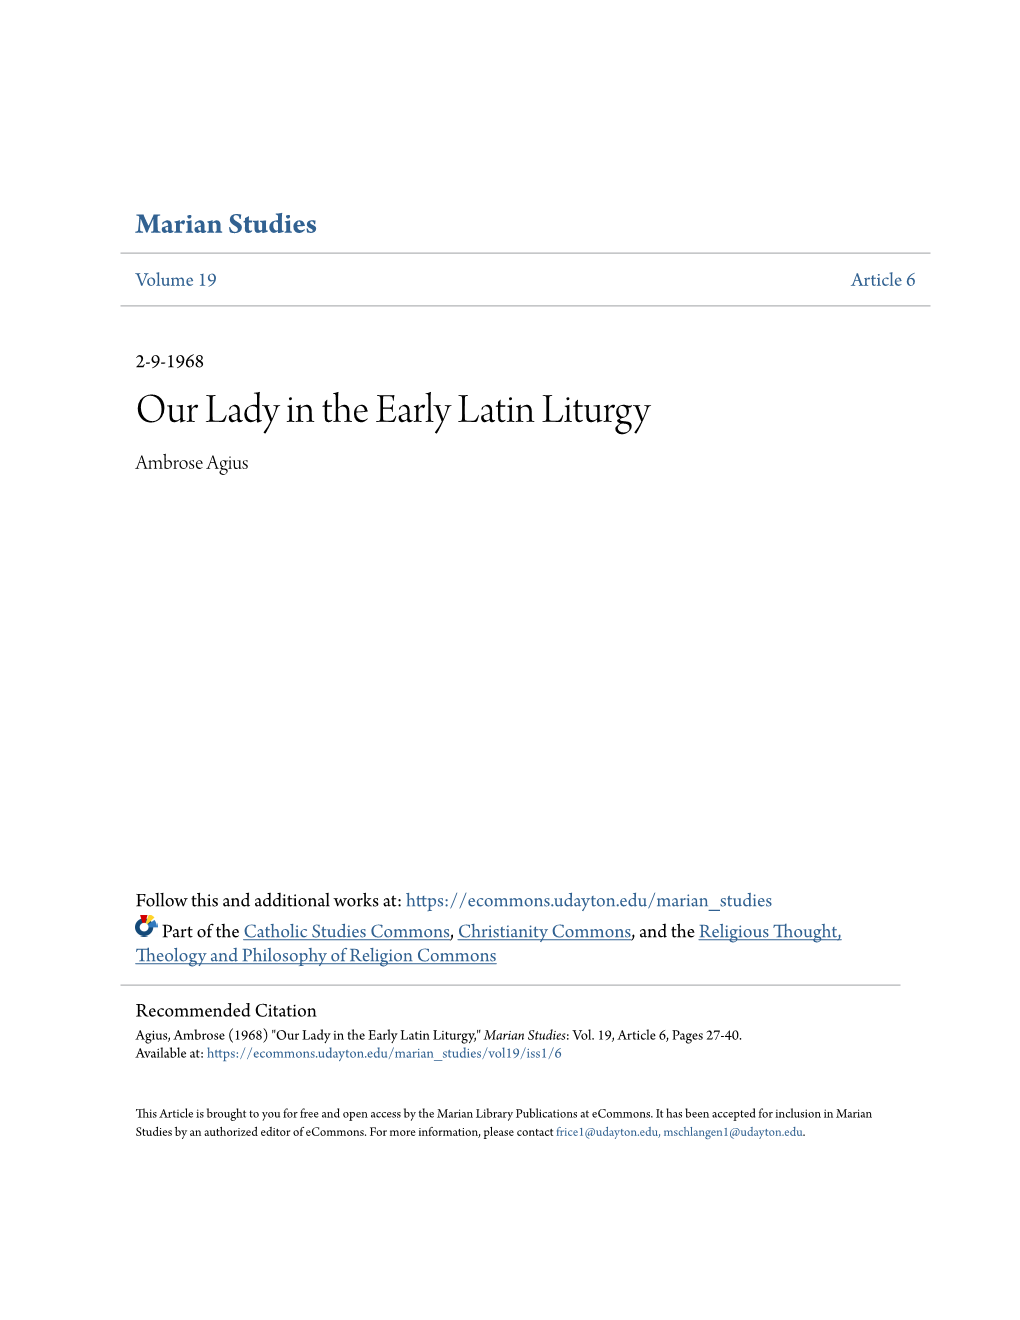 Our Lady in the Early Latin Liturgy Ambrose Agius